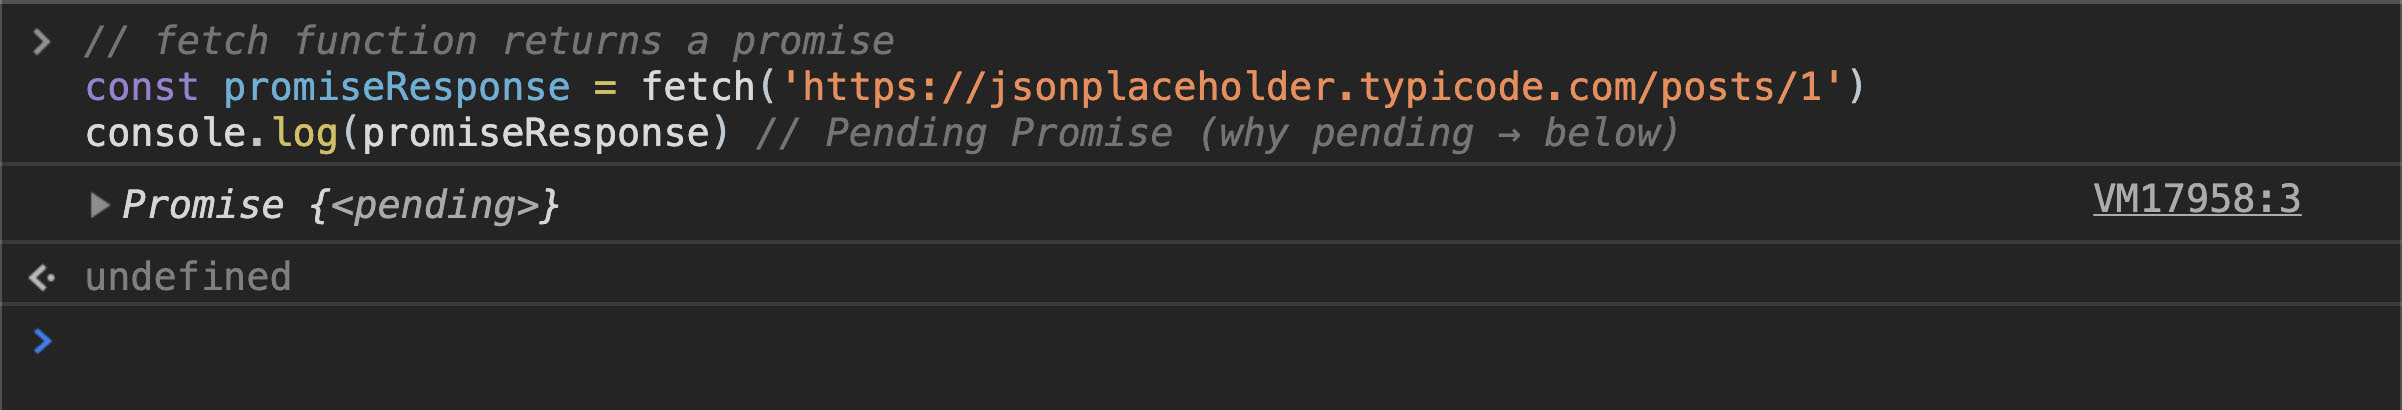 Pending promise in the console